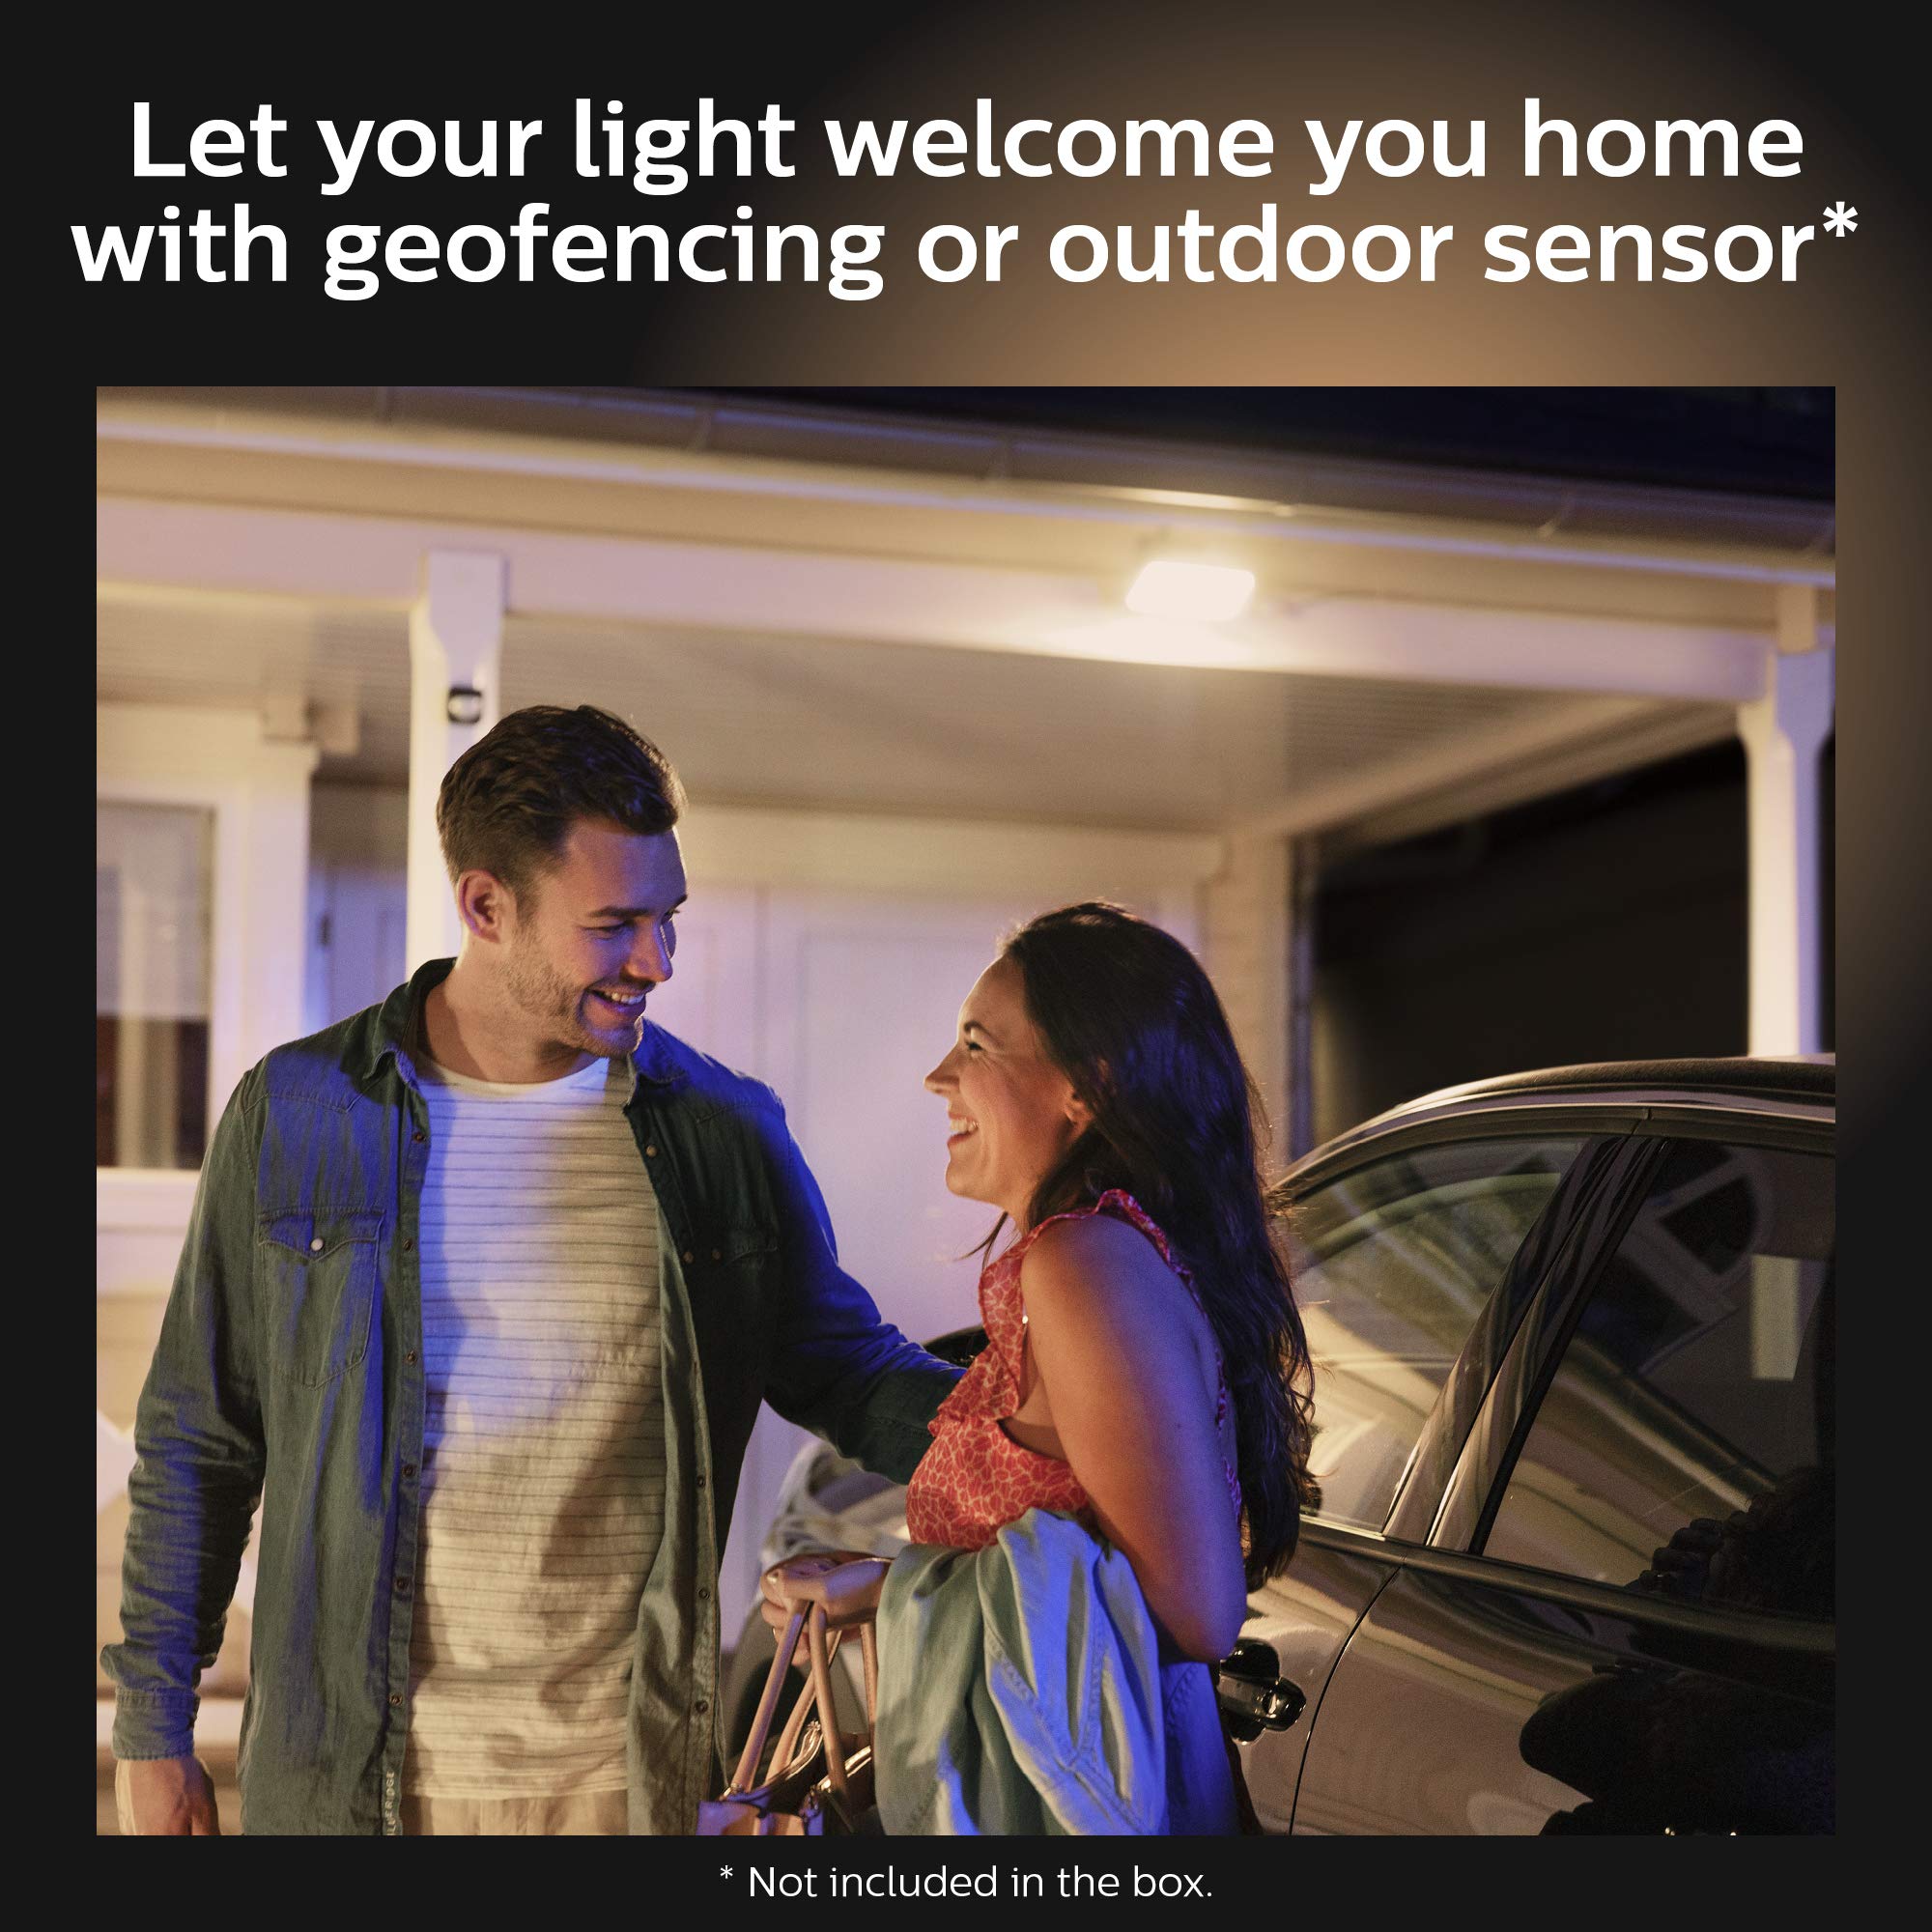 Philips Hue Welcome Outdoor White Smart Floodlight, Works with Amazon Alexa, Apple Homekit, and Google Assistant, Hue Bridge Required, 1 Count (Pack of 1)